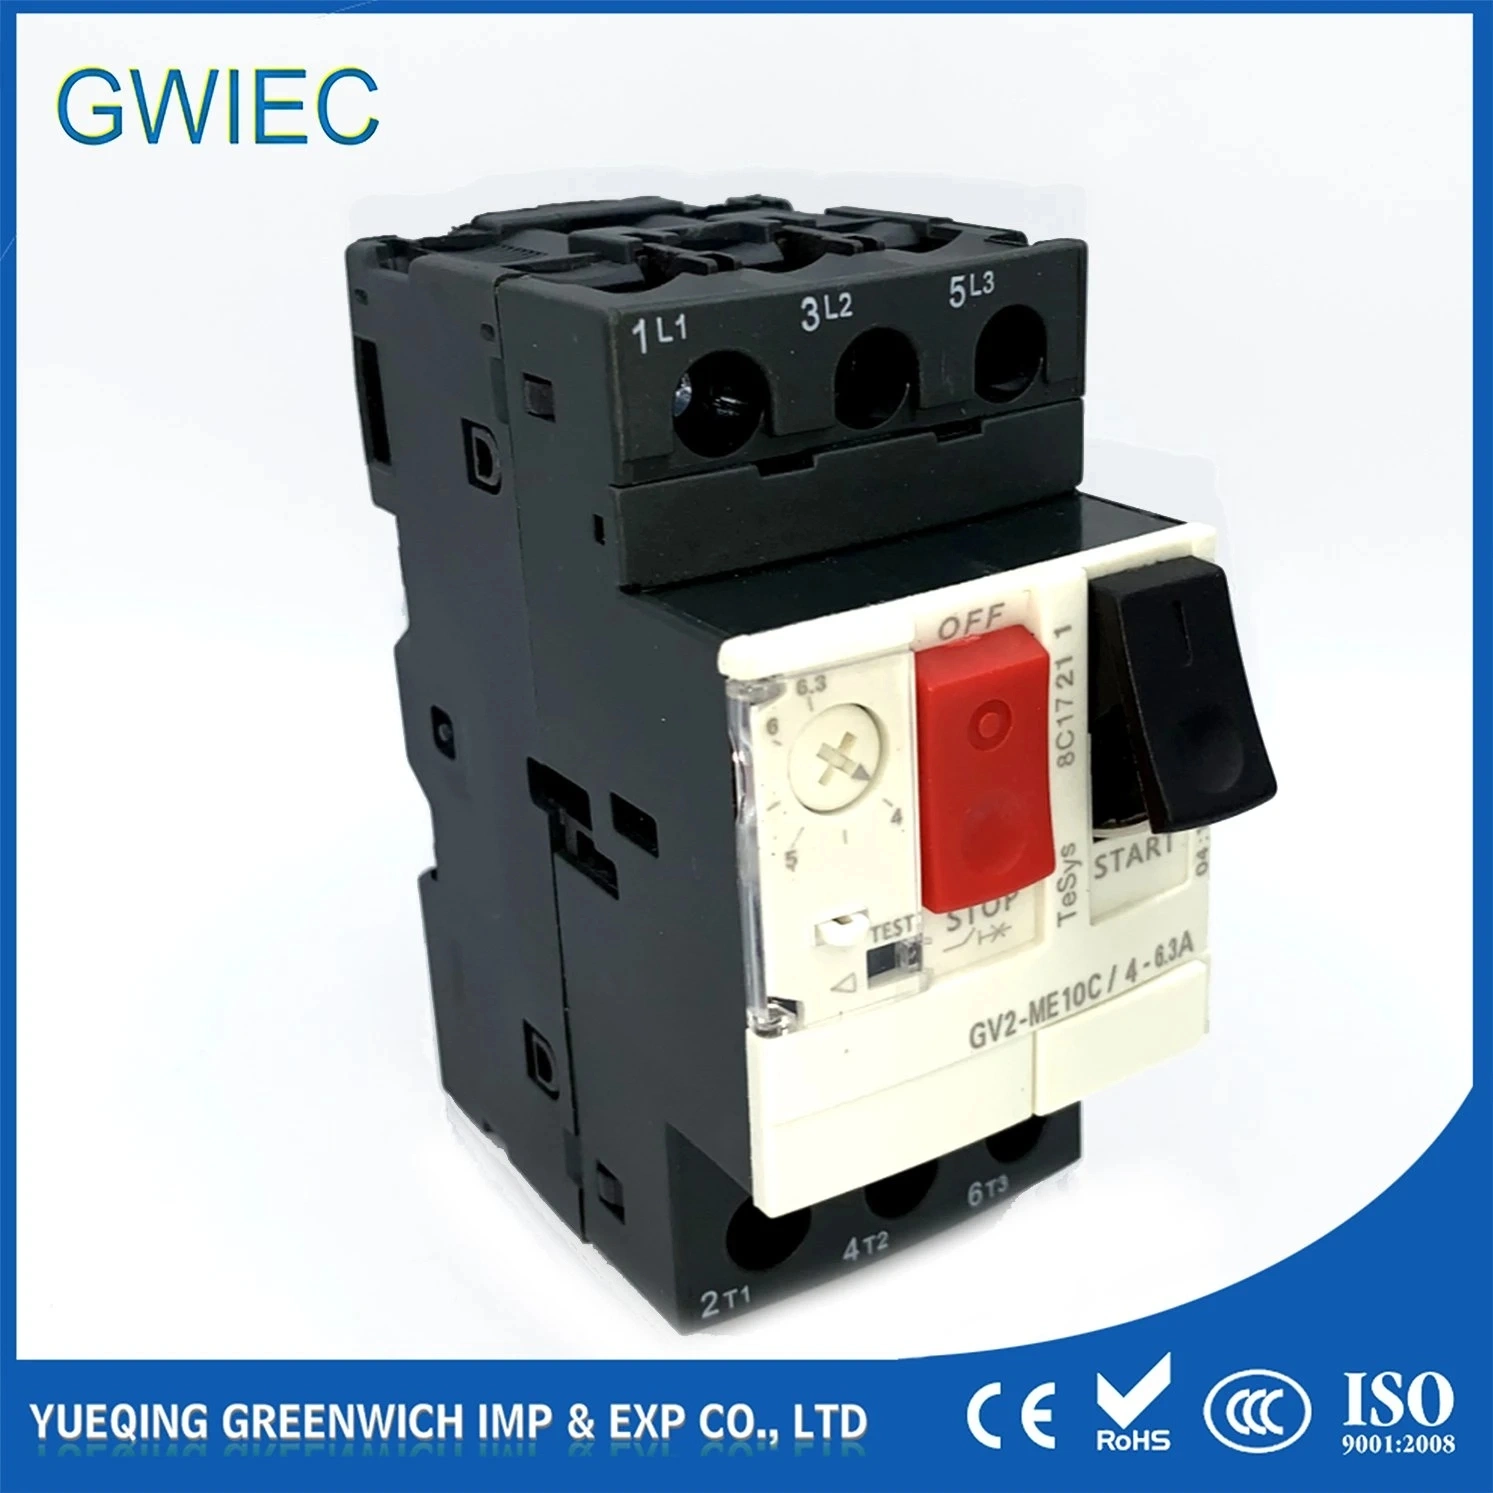 0.63-1.0 1.6-2.5 Breaker Overcurrent Overload Protection Motor Circuit Protector with Factory Price